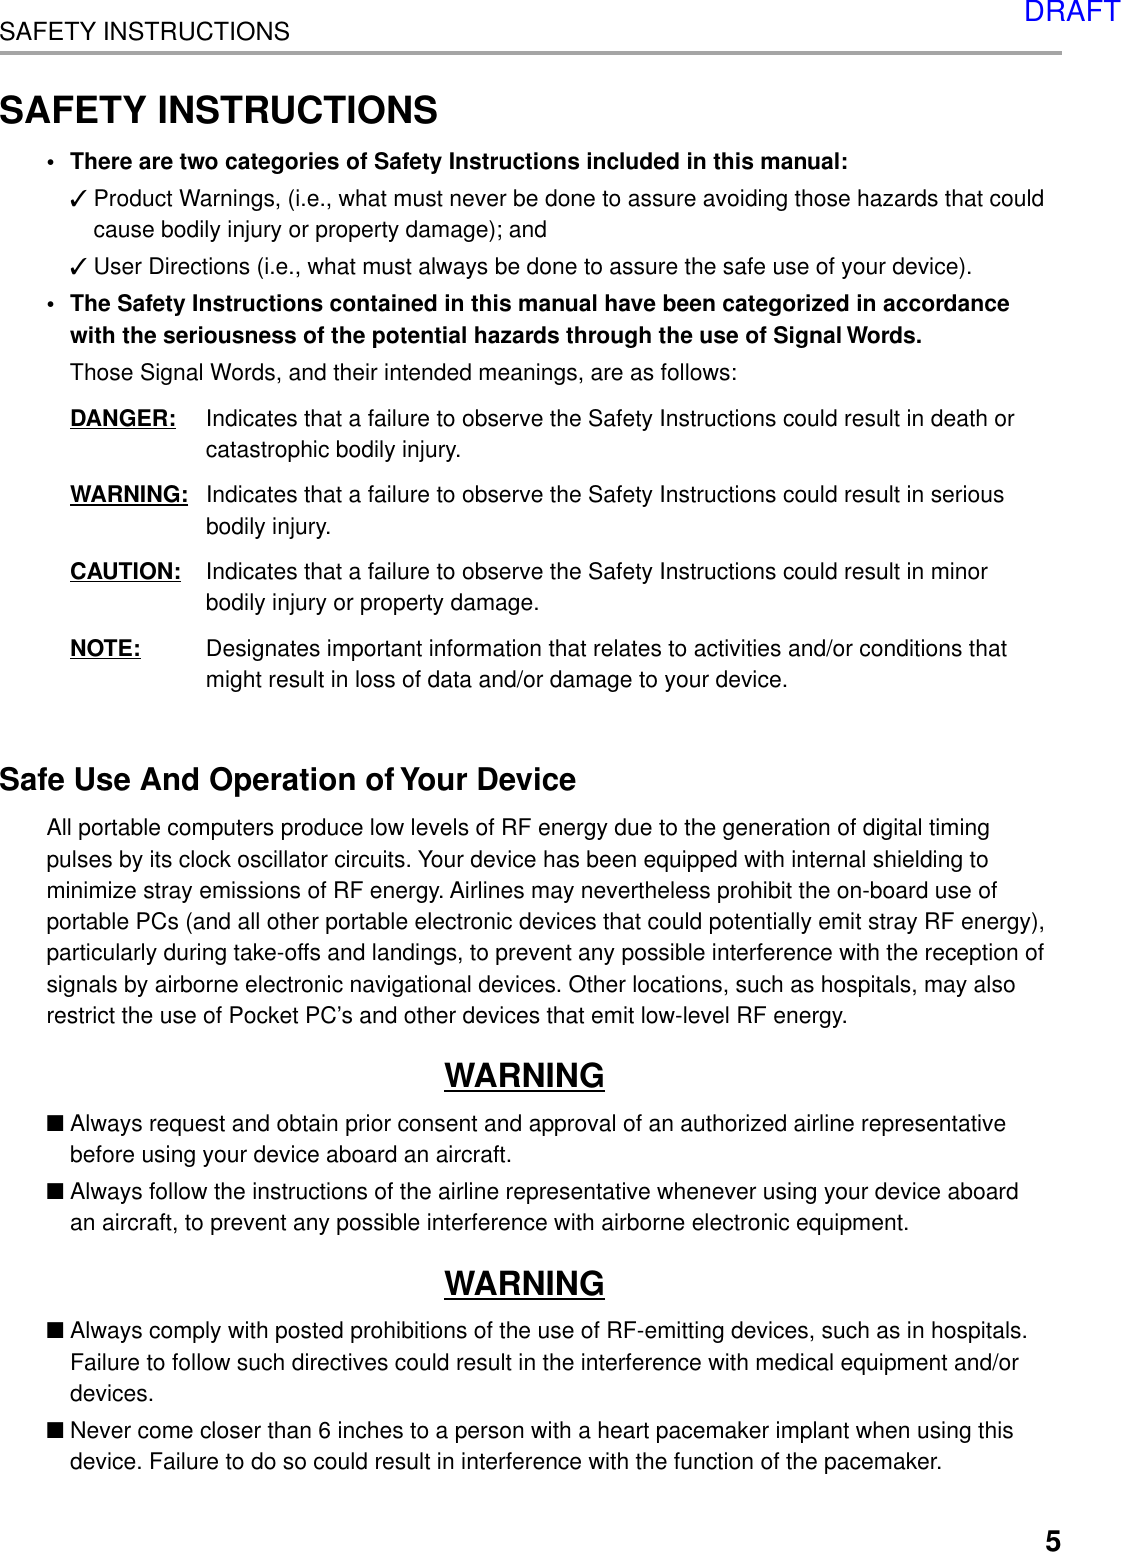 5SAFETY INSTRUCTIONSSAFETY INSTRUCTIONS• There are two categories of Safety Instructions included in this manual:✓Product Warnings, (i.e., what must never be done to assure avoiding those hazards that couldcause bodily injury or property damage); and✓User Directions (i.e., what must always be done to assure the safe use of your device).• The Safety Instructions contained in this manual have been categorized in accordancewith the seriousness of the potential hazards through the use of Signal Words.Those Signal Words, and their intended meanings, are as follows:DANGER: Indicates that a failure to observe the Safety Instructions could result in death orcatastrophic bodily injury.WARNING: Indicates that a failure to observe the Safety Instructions could result in seriousbodily injury.CAUTION: Indicates that a failure to observe the Safety Instructions could result in minorbodily injury or property damage.NOTE: Designates important information that relates to activities and/or conditions thatmight result in loss of data and/or damage to your device.Safe Use And Operation of Your DeviceAll portable computers produce low levels of RF energy due to the generation of digital timingpulses by its clock oscillator circuits. Your device has been equipped with internal shielding tominimize stray emissions of RF energy. Airlines may nevertheless prohibit the on-board use ofportable PCs (and all other portable electronic devices that could potentially emit stray RF energy),particularly during take-offs and landings, to prevent any possible interference with the reception ofsignals by airborne electronic navigational devices. Other locations, such as hospitals, may alsorestrict the use of Pocket PC’s and other devices that emit low-level RF energy.WARNING■Always request and obtain prior consent and approval of an authorized airline representativebefore using your device aboard an aircraft.■Always follow the instructions of the airline representative whenever using your device aboardan aircraft, to prevent any possible interference with airborne electronic equipment.WARNING■Always comply with posted prohibitions of the use of RF-emitting devices, such as in hospitals.Failure to follow such directives could result in the interference with medical equipment and/ordevices.■Never come closer than 6 inches to a person with a heart pacemaker implant when using thisdevice. Failure to do so could result in interference with the function of the pacemaker.DRAFT